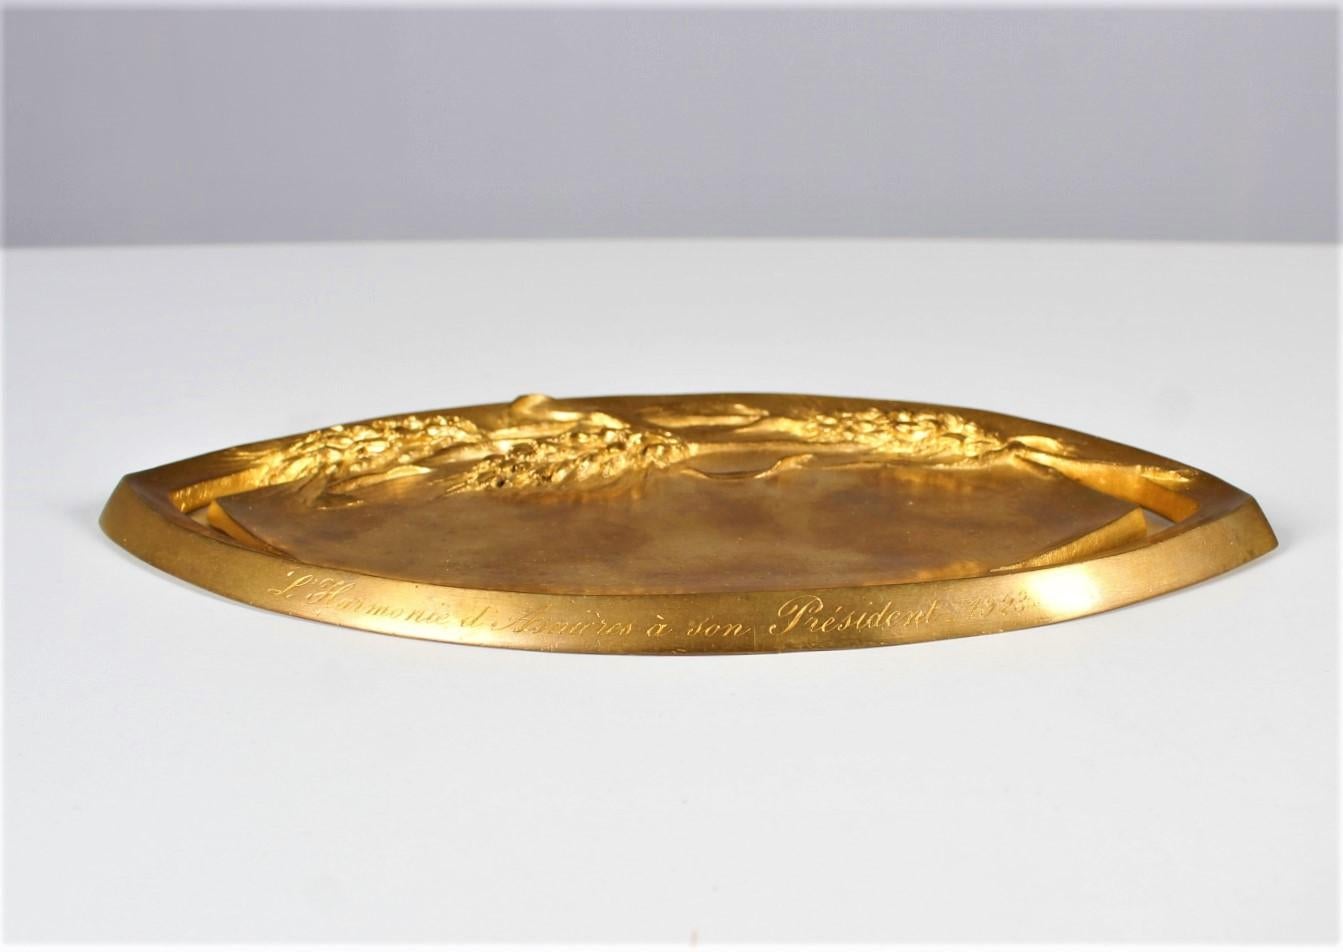 Beautiful desk tray with ornaments of wheat straws.
Made of heavy bronze , nicely gilded.
Signed by the french artist 